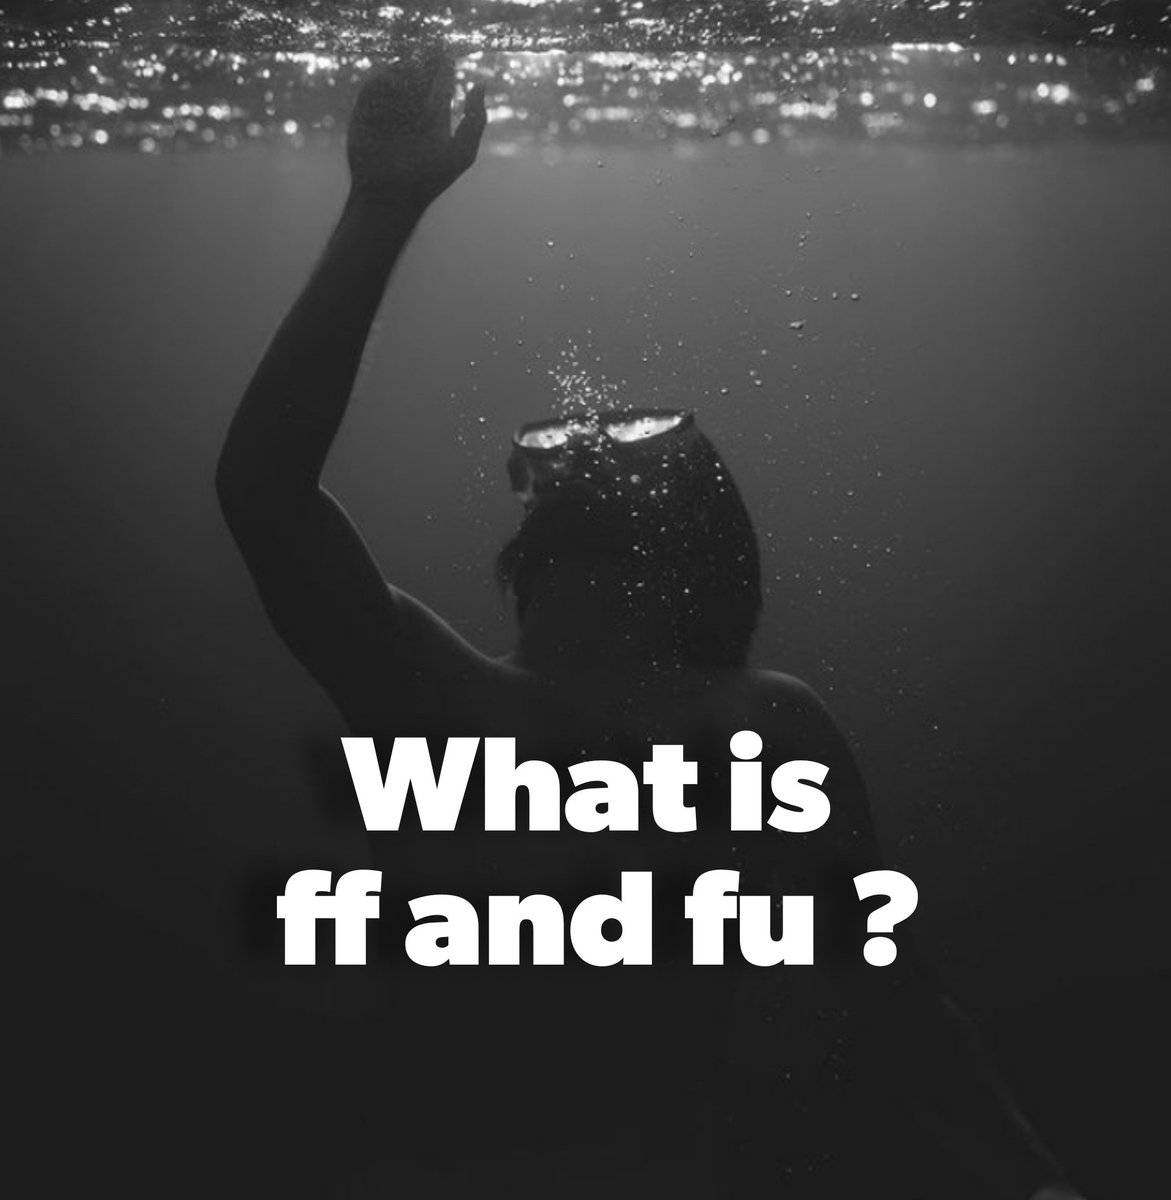 What Does FF Mean?